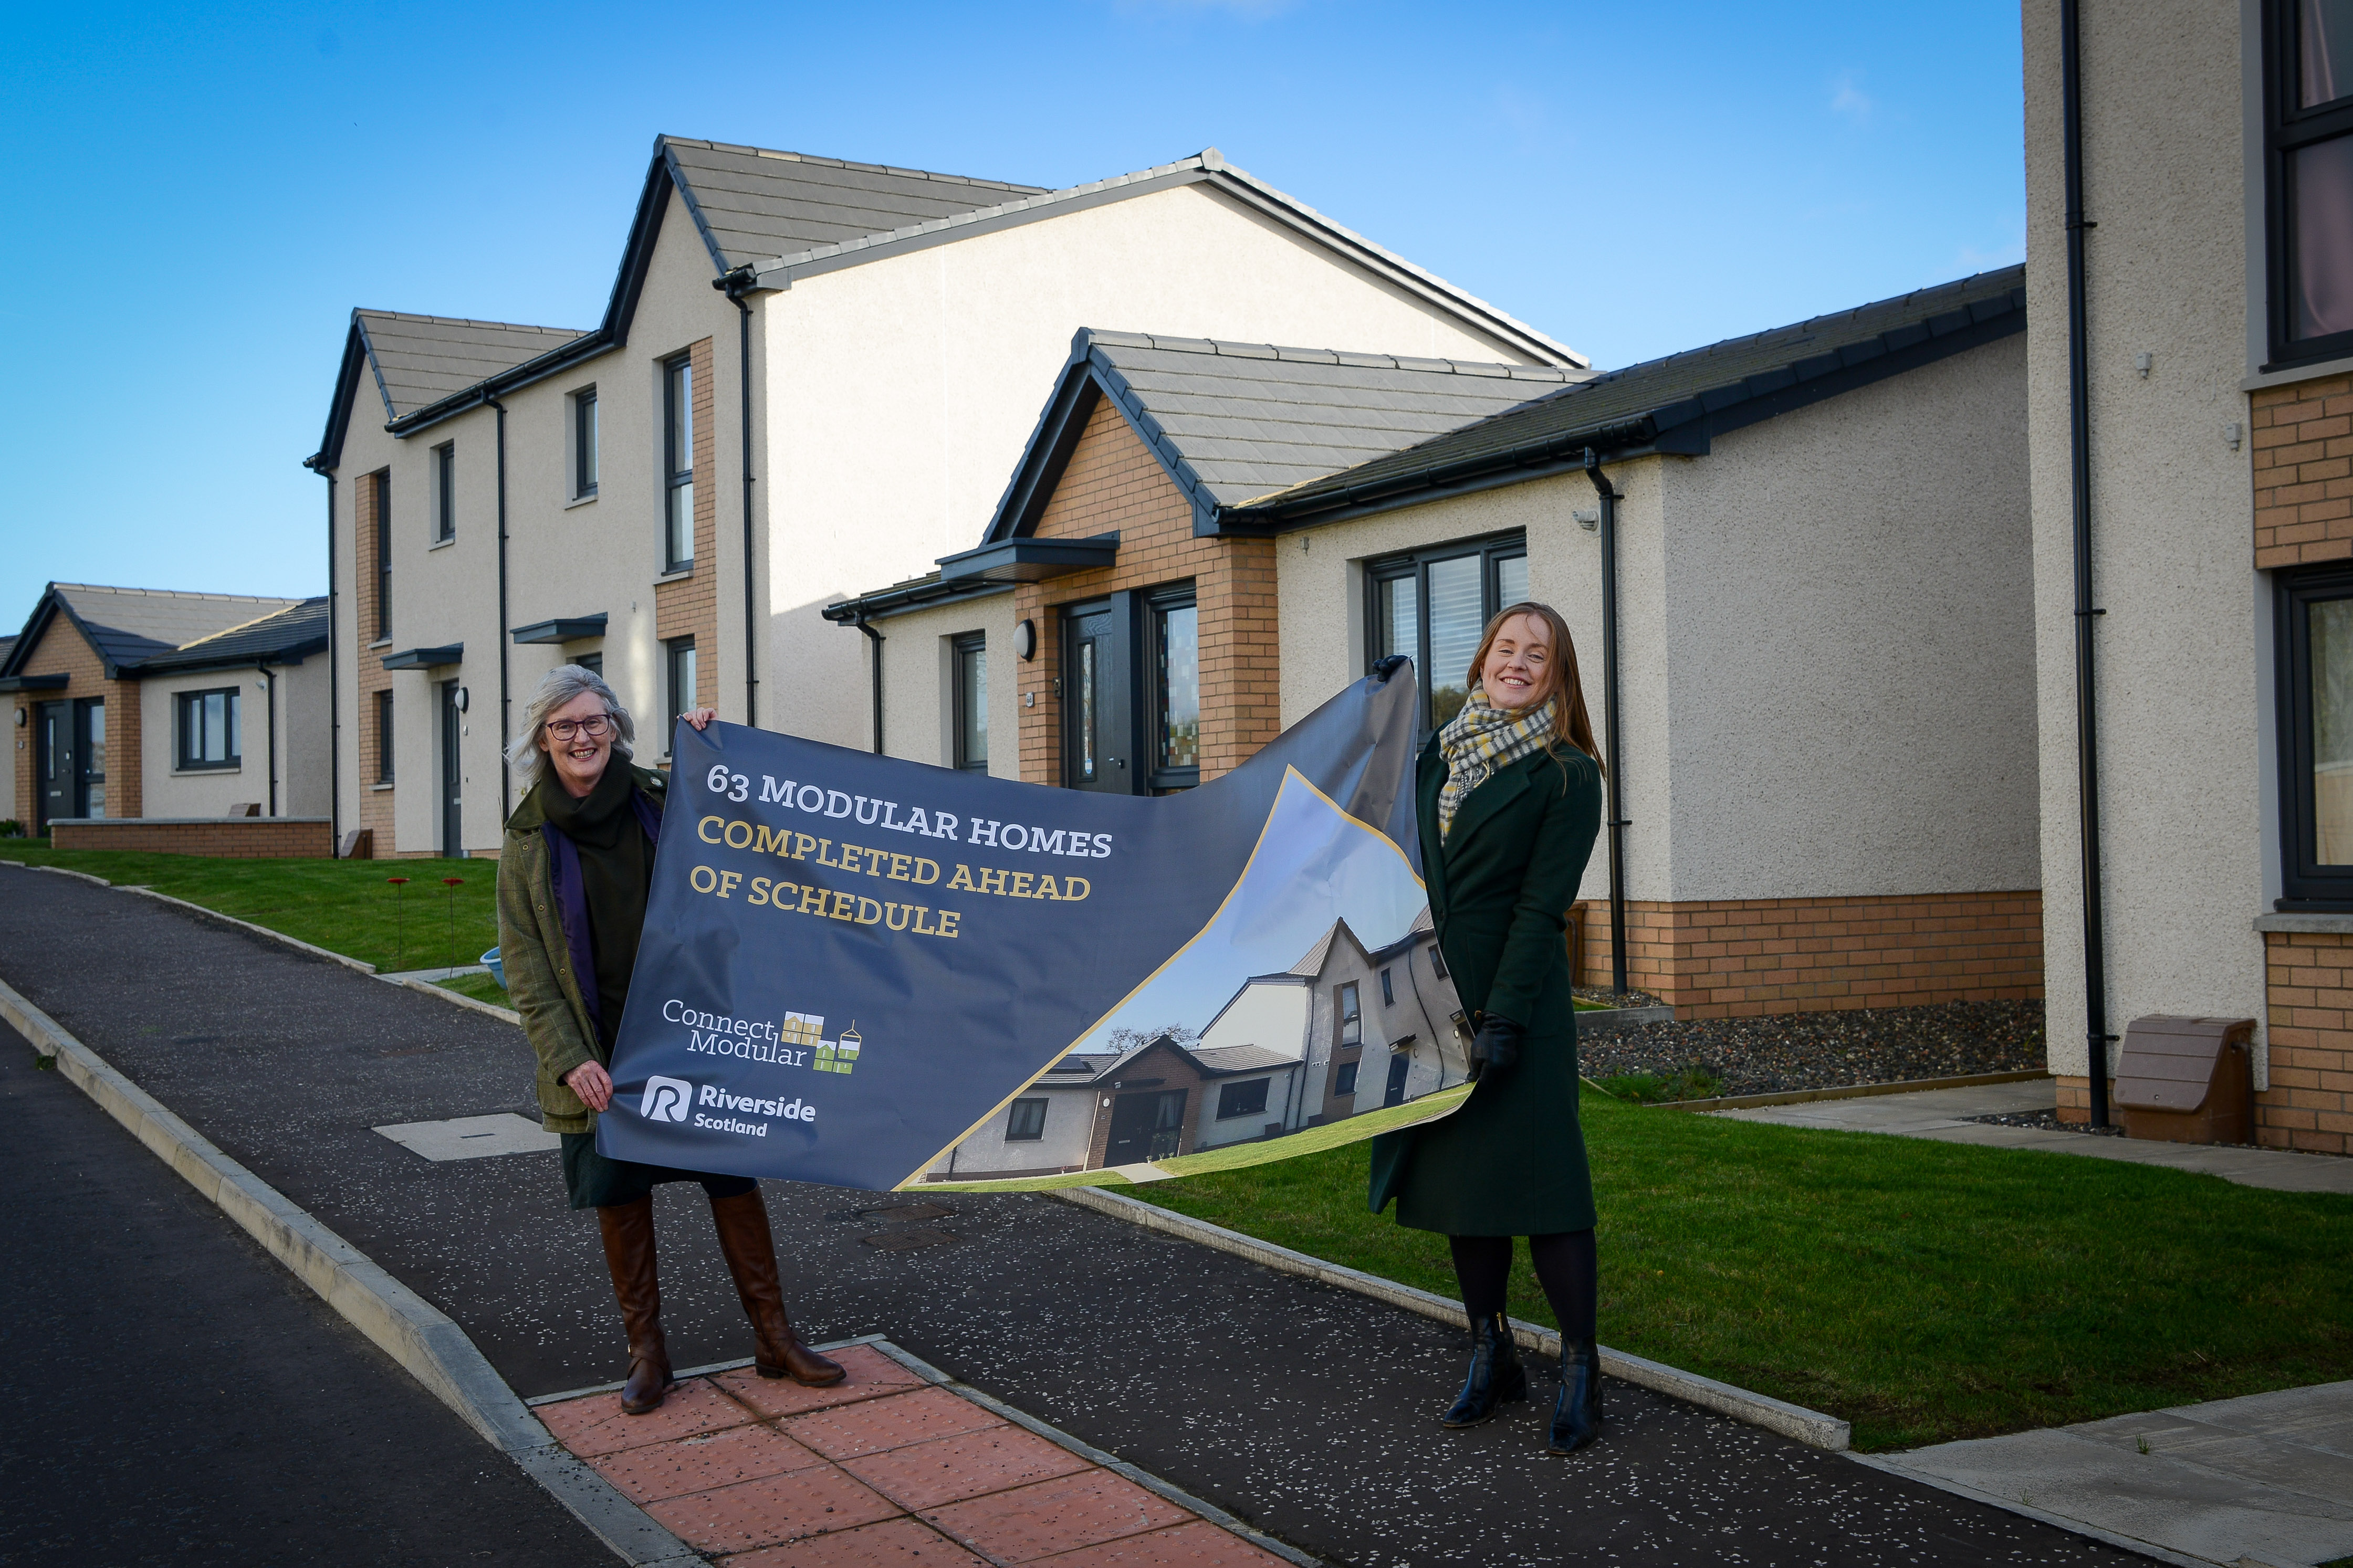 Scotland's first large scale modular housing development is completed